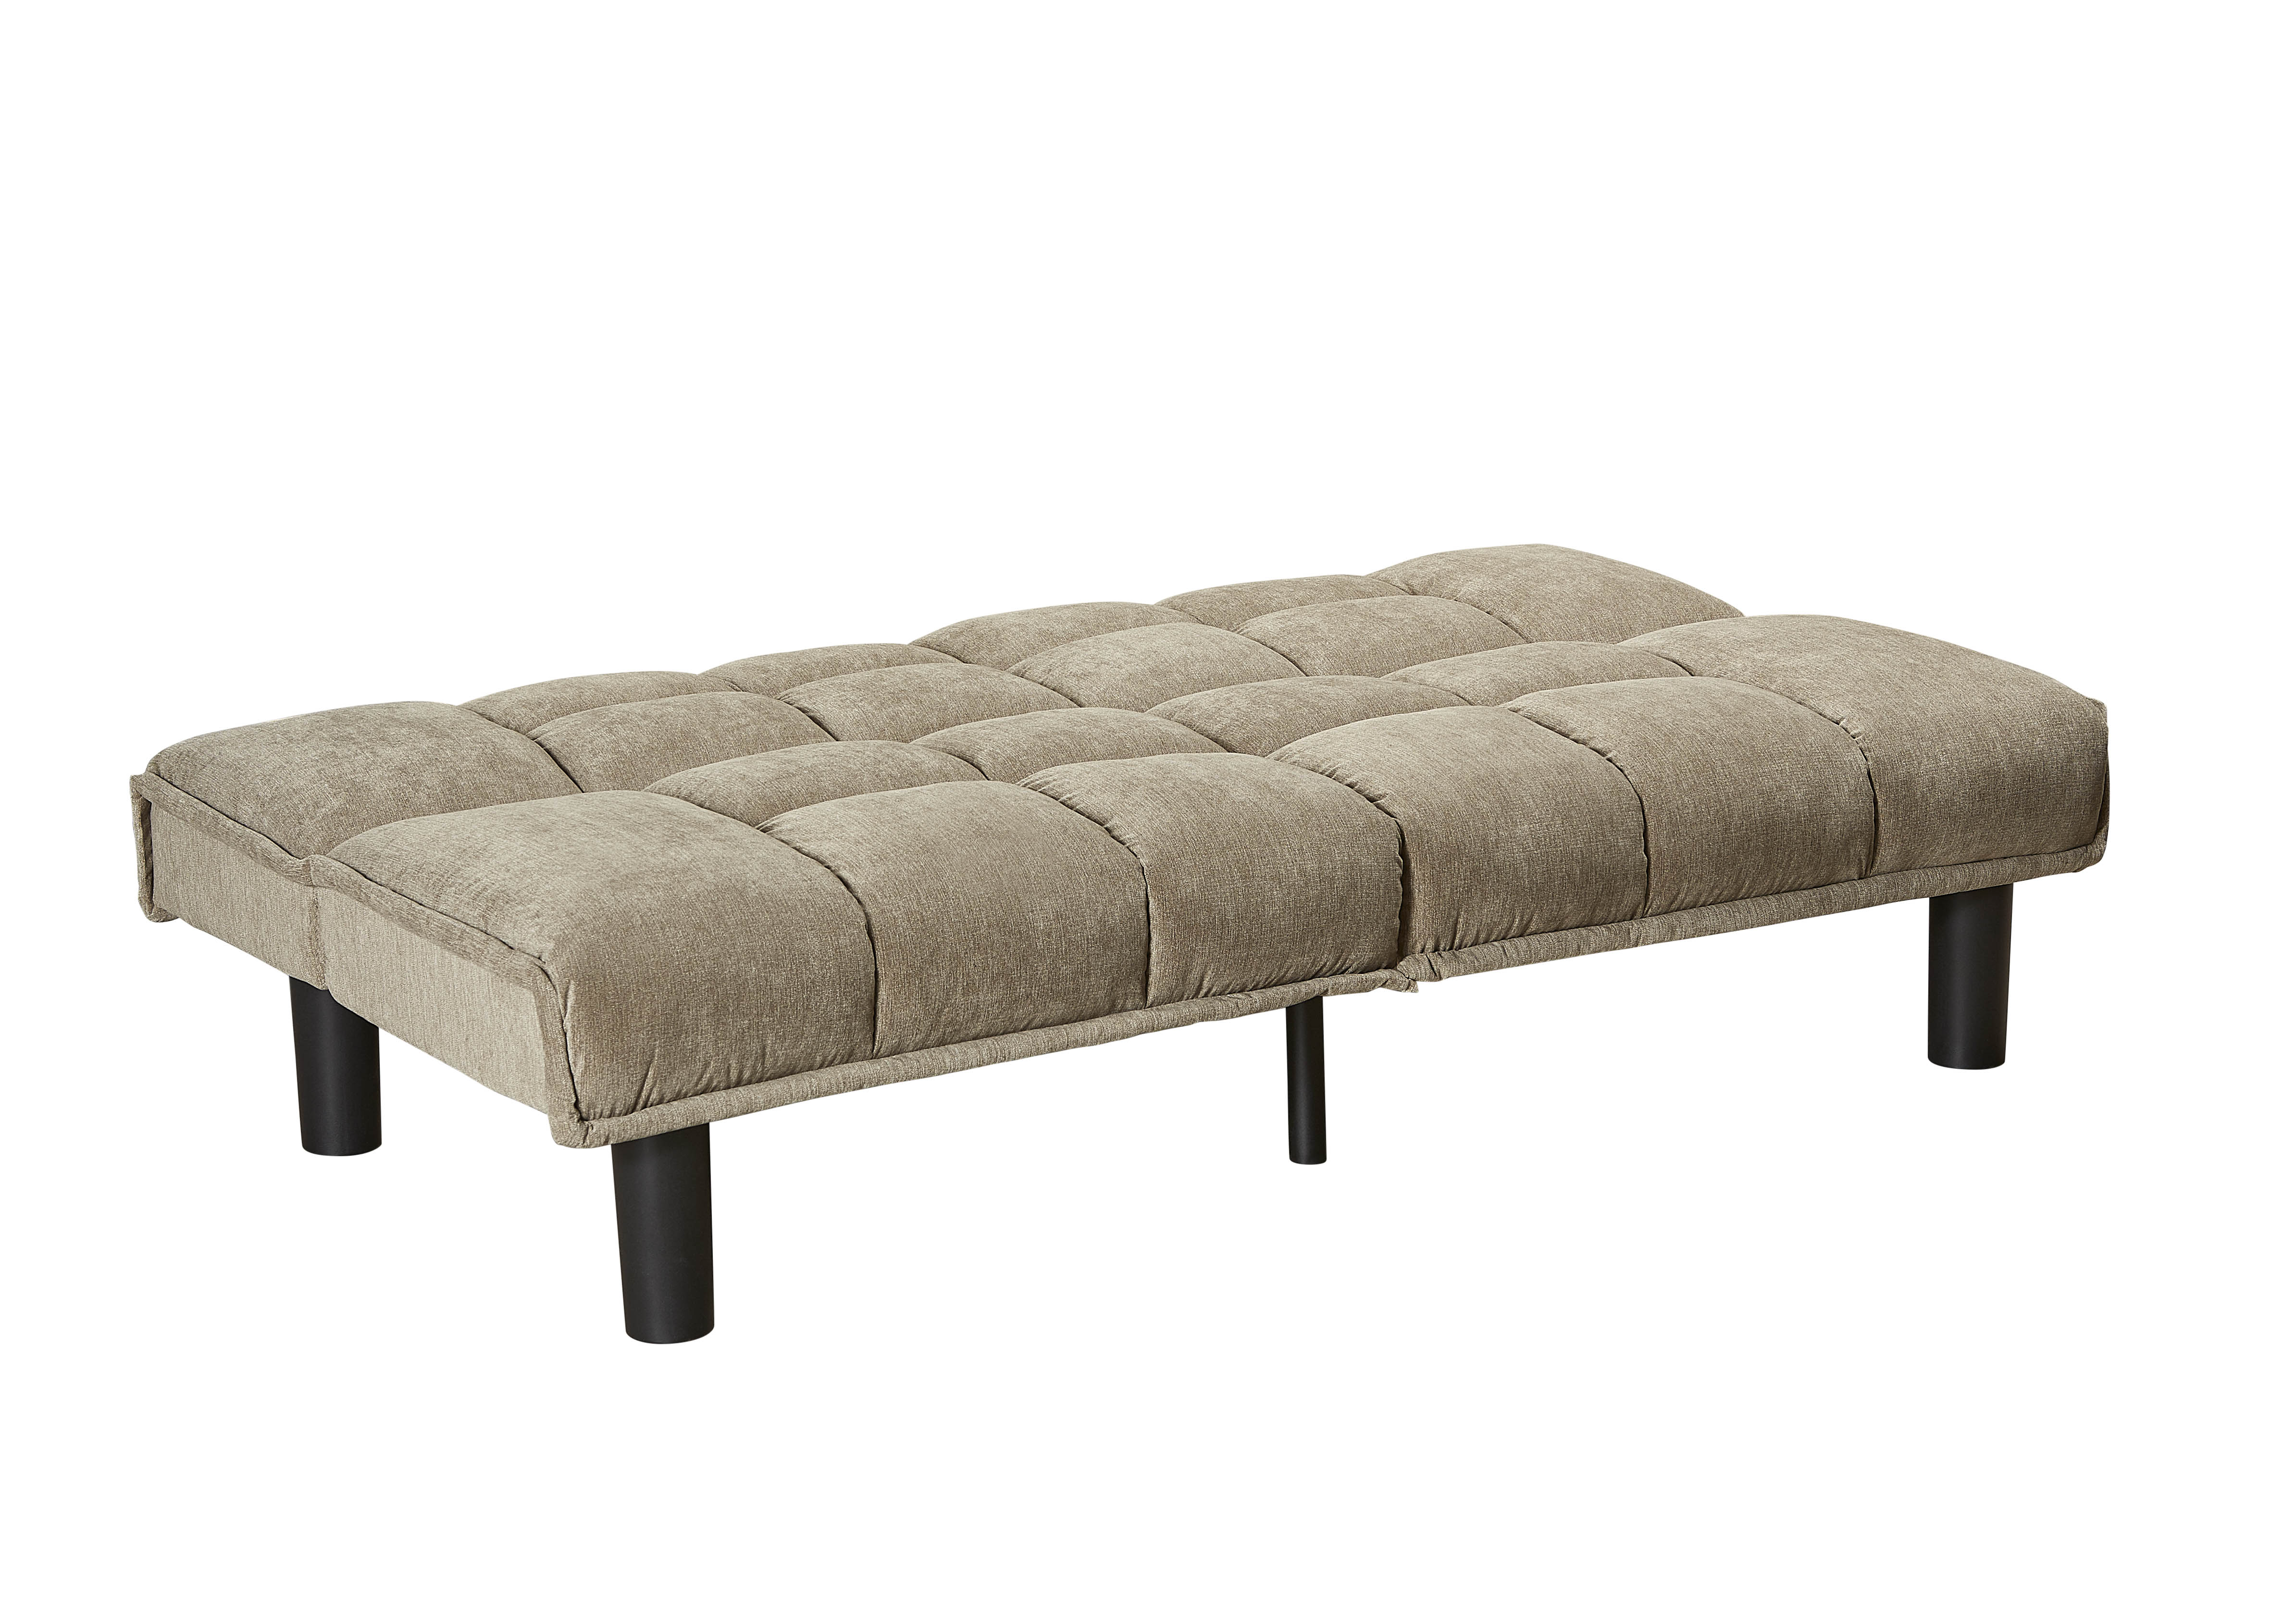 Mainstays Tufted Microfiber Futon, Tan Faux Suede - image 4 of 5